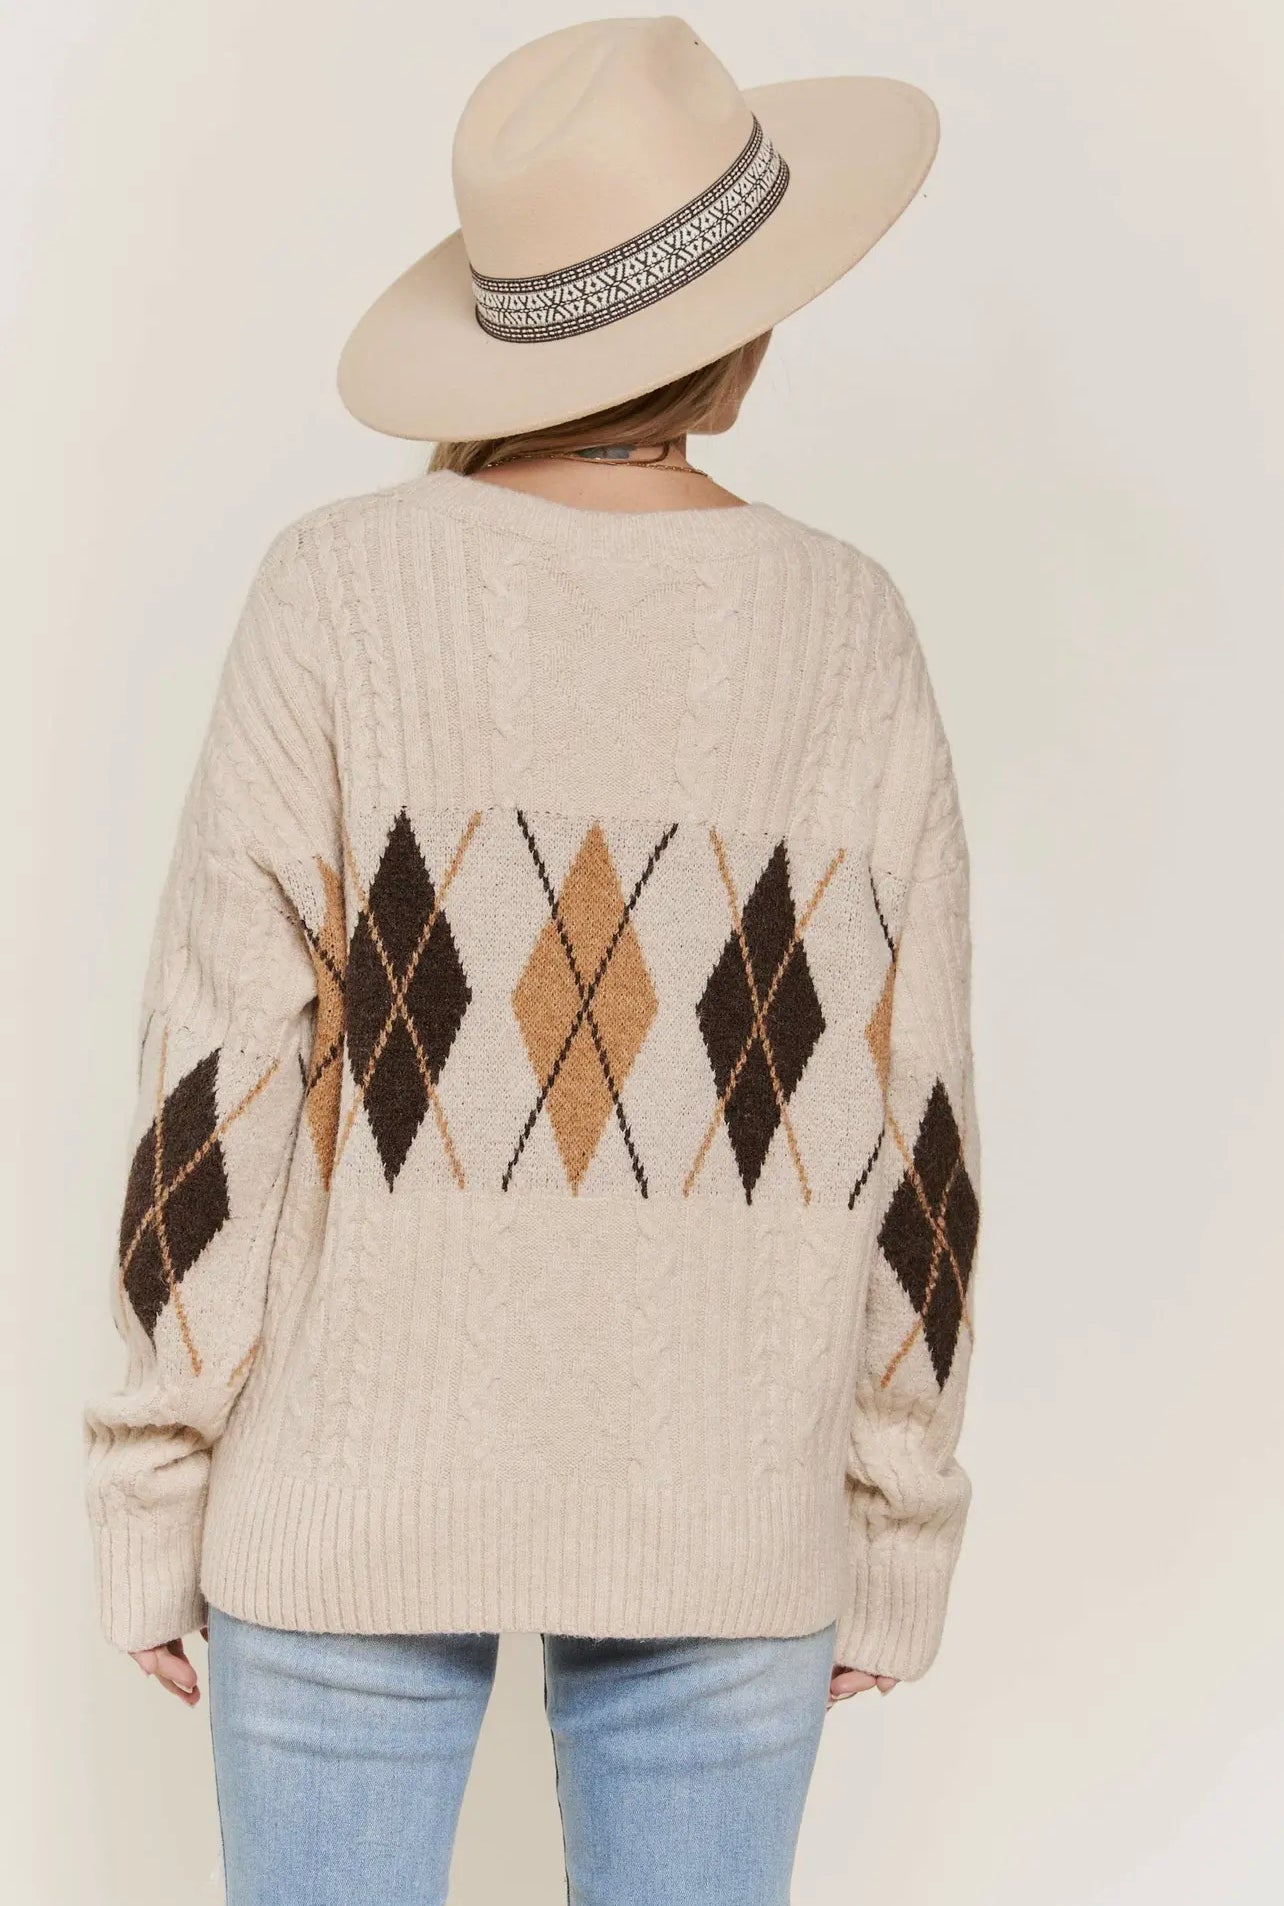 Oatmeal Patterned Sweater Top